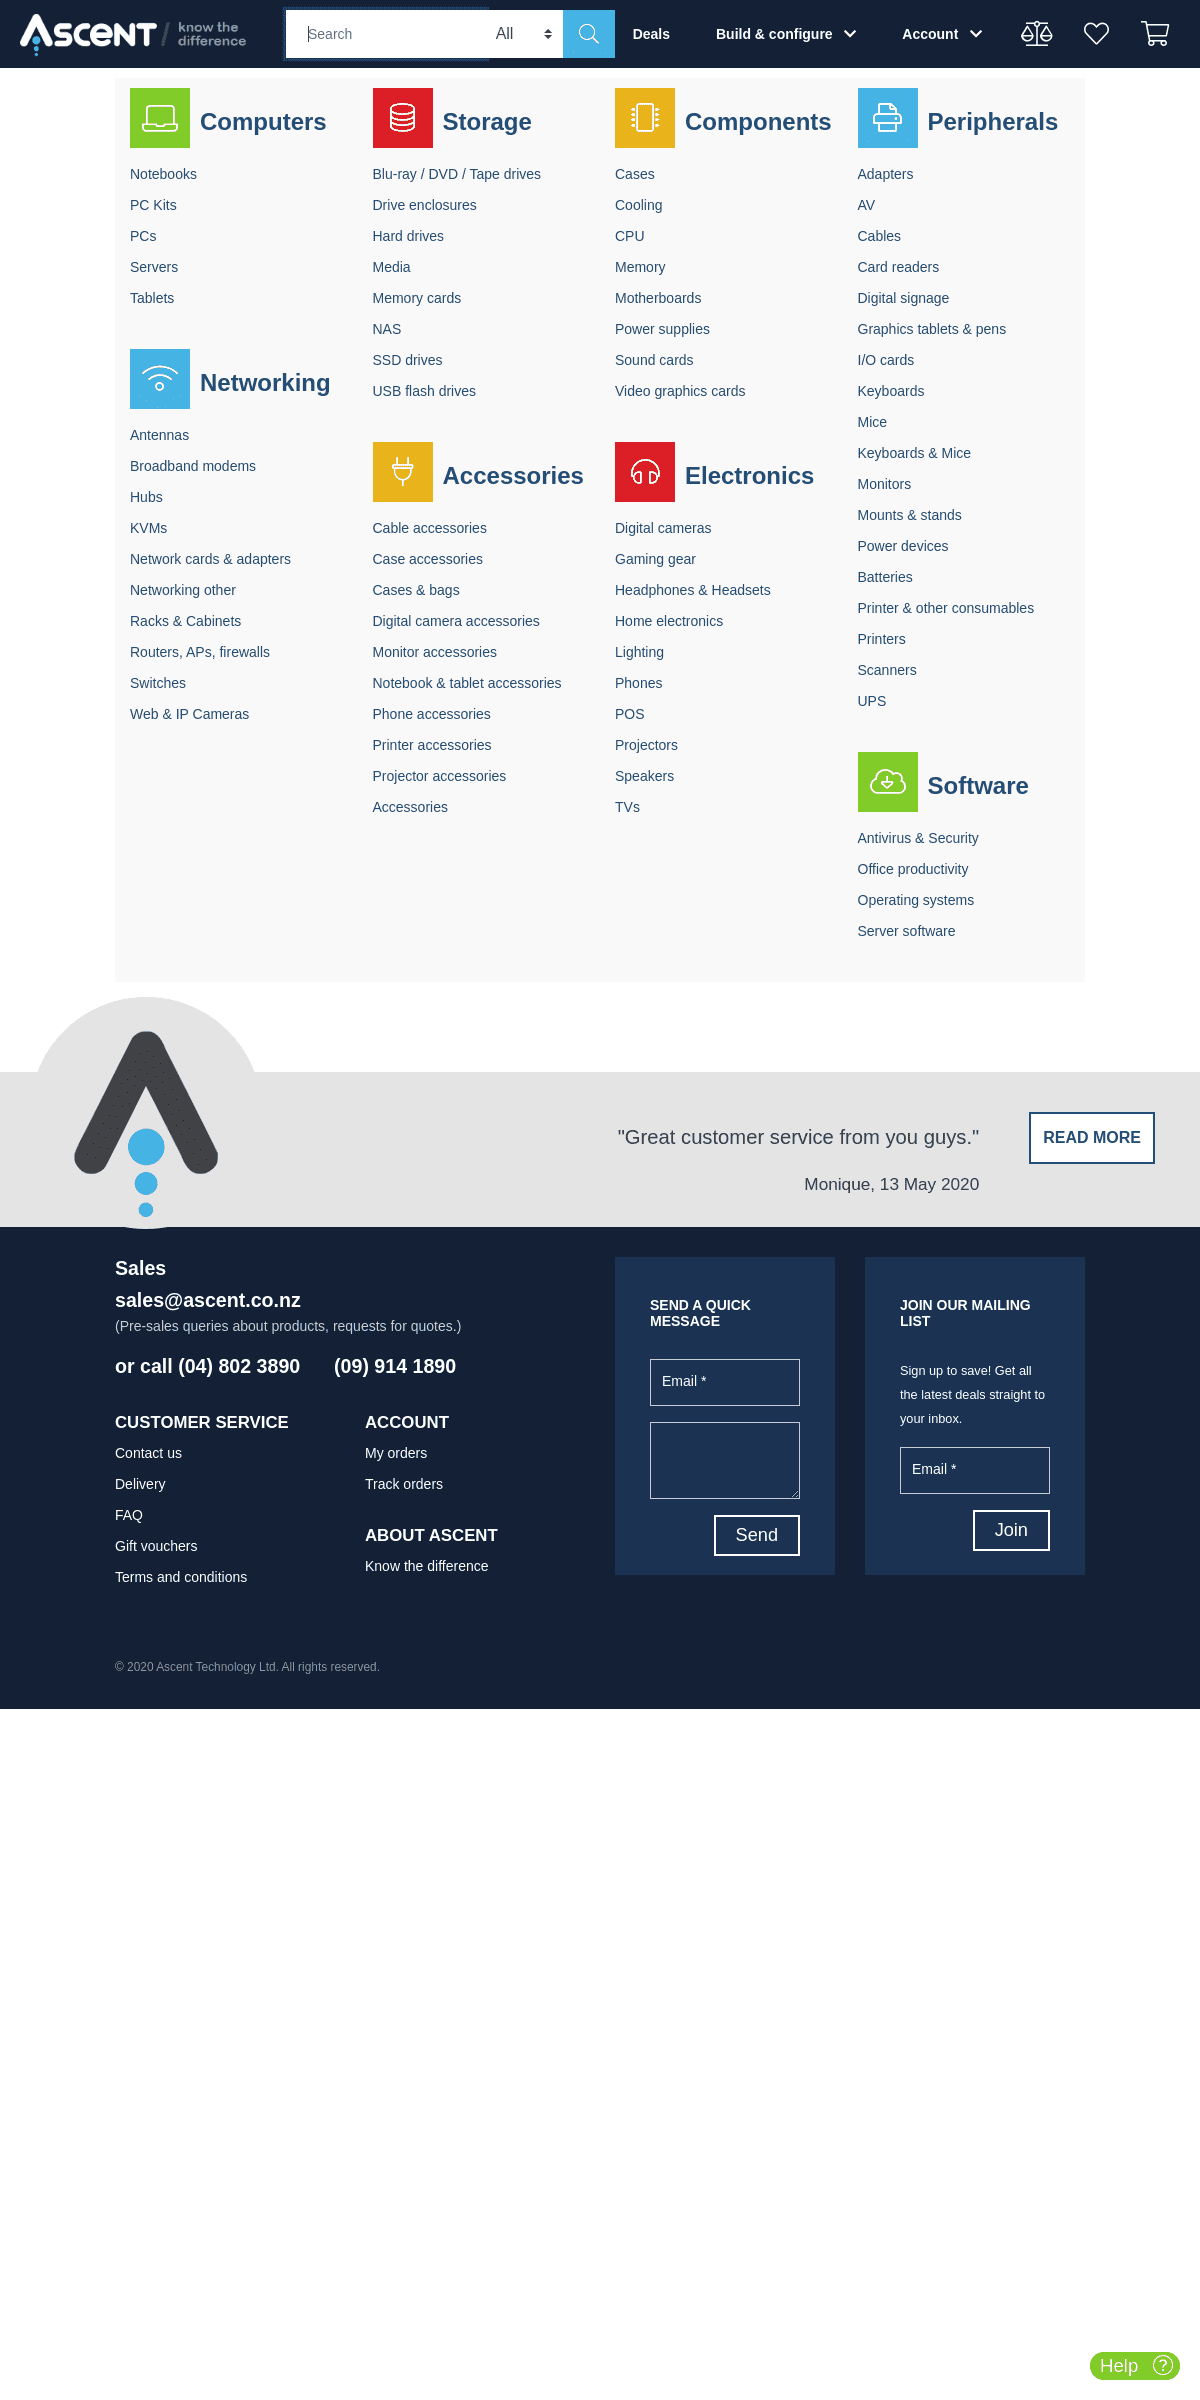 A complete backup of ascent.co.nz